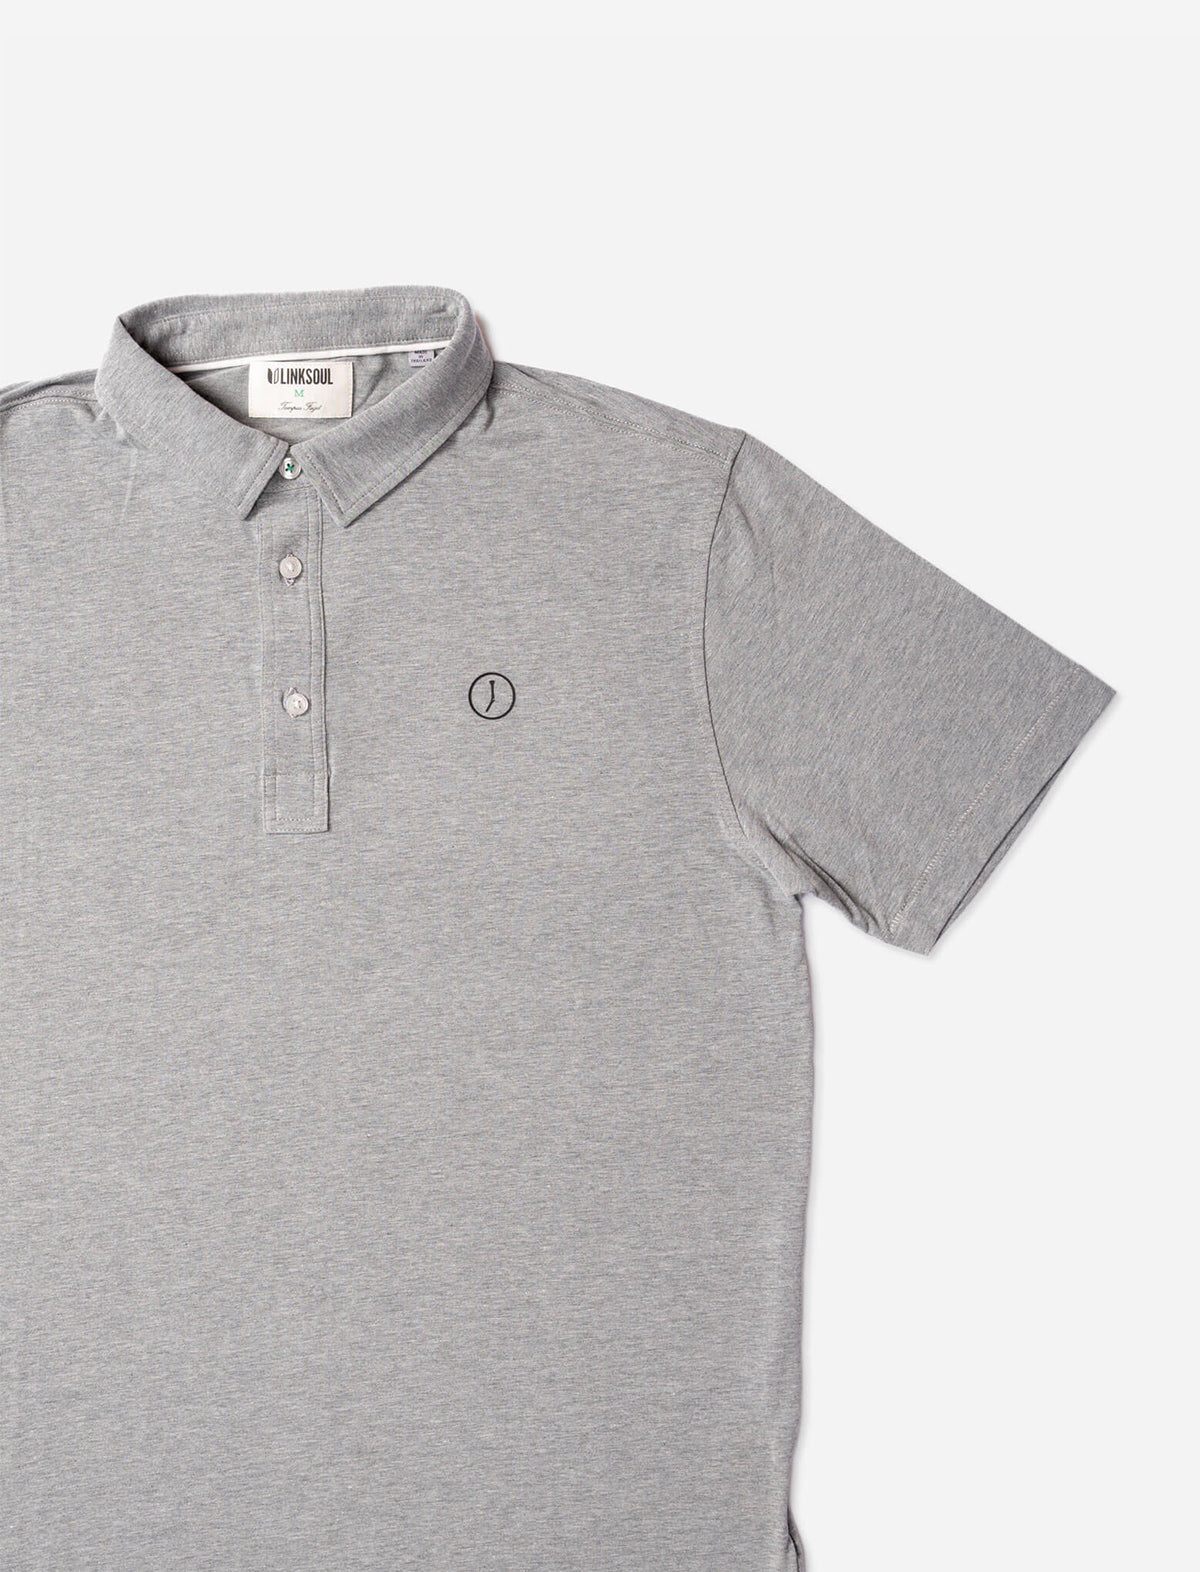 THE GOLFERS JOURNAL Circle Tee Drytech Polo Shirt in Grey